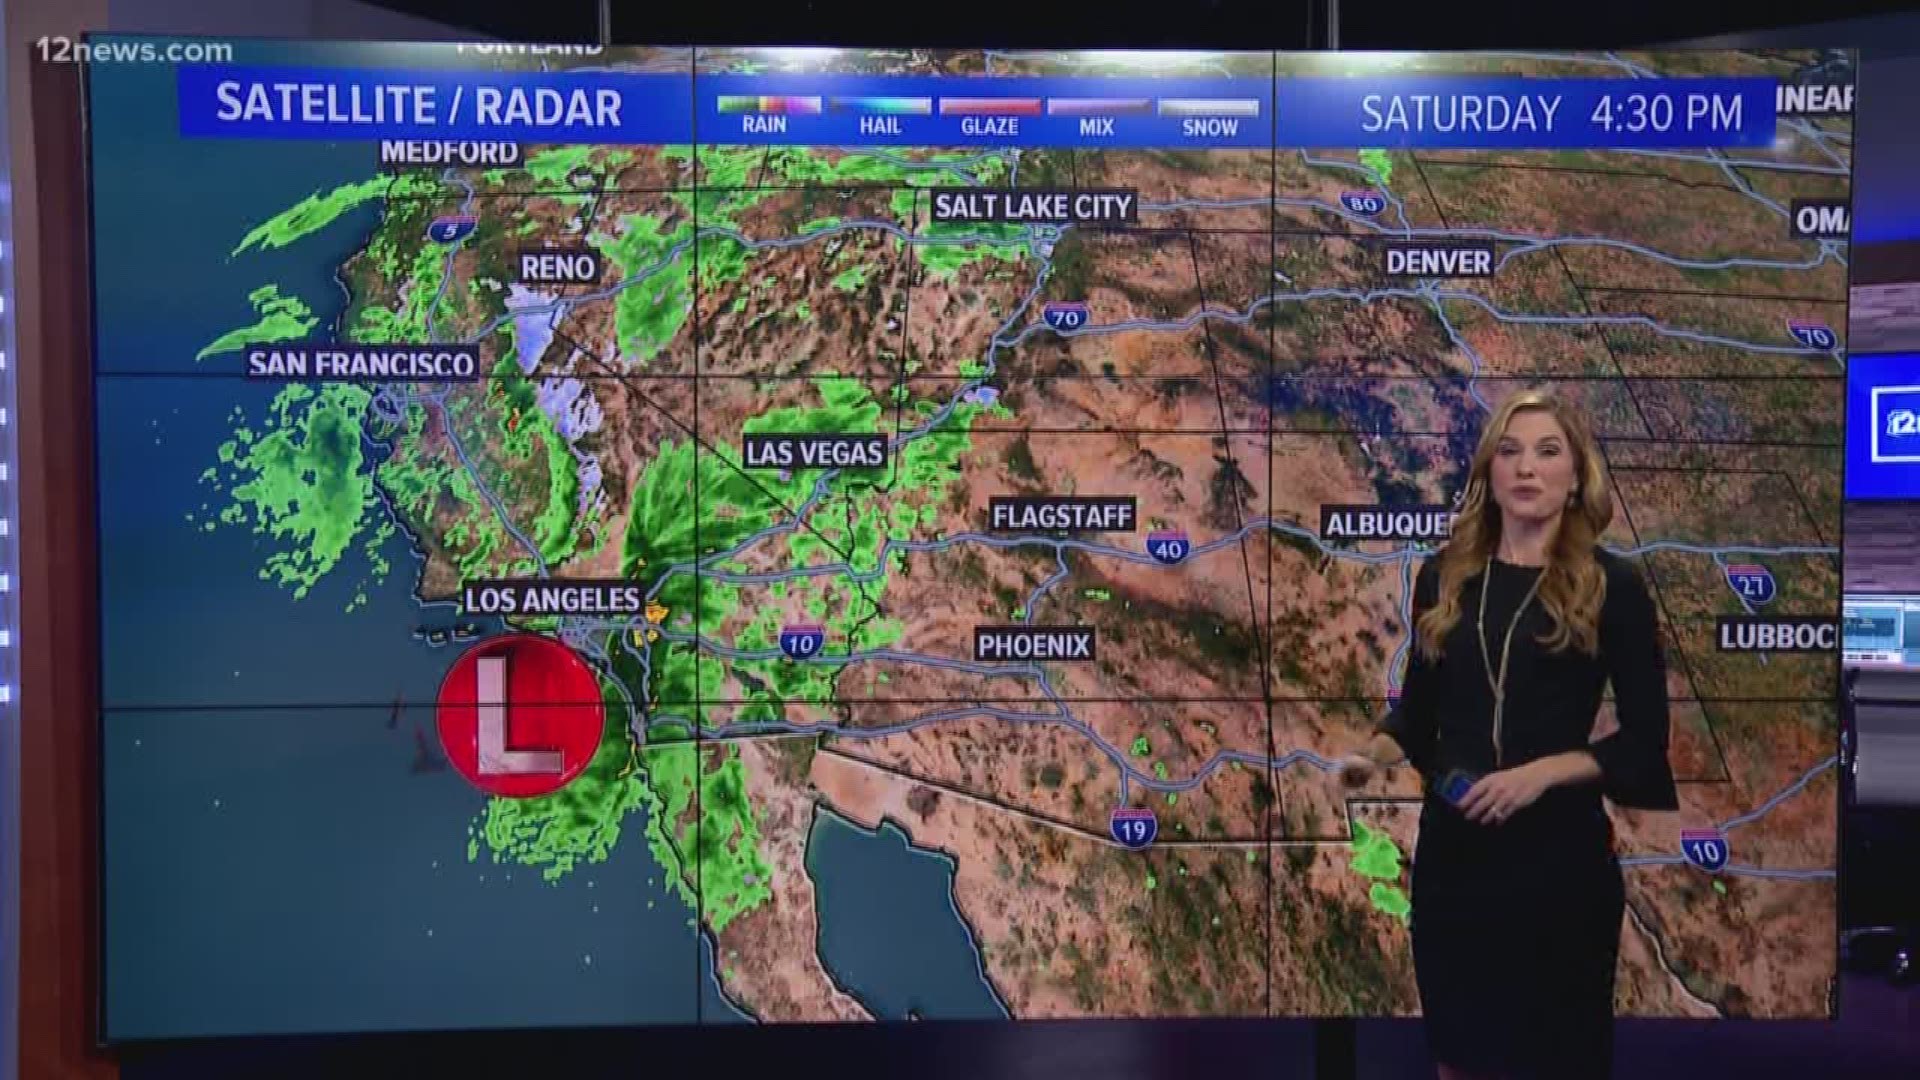 Temperatures will be nice after it rains, but areas of the Valley could get up to half an inch of rain.